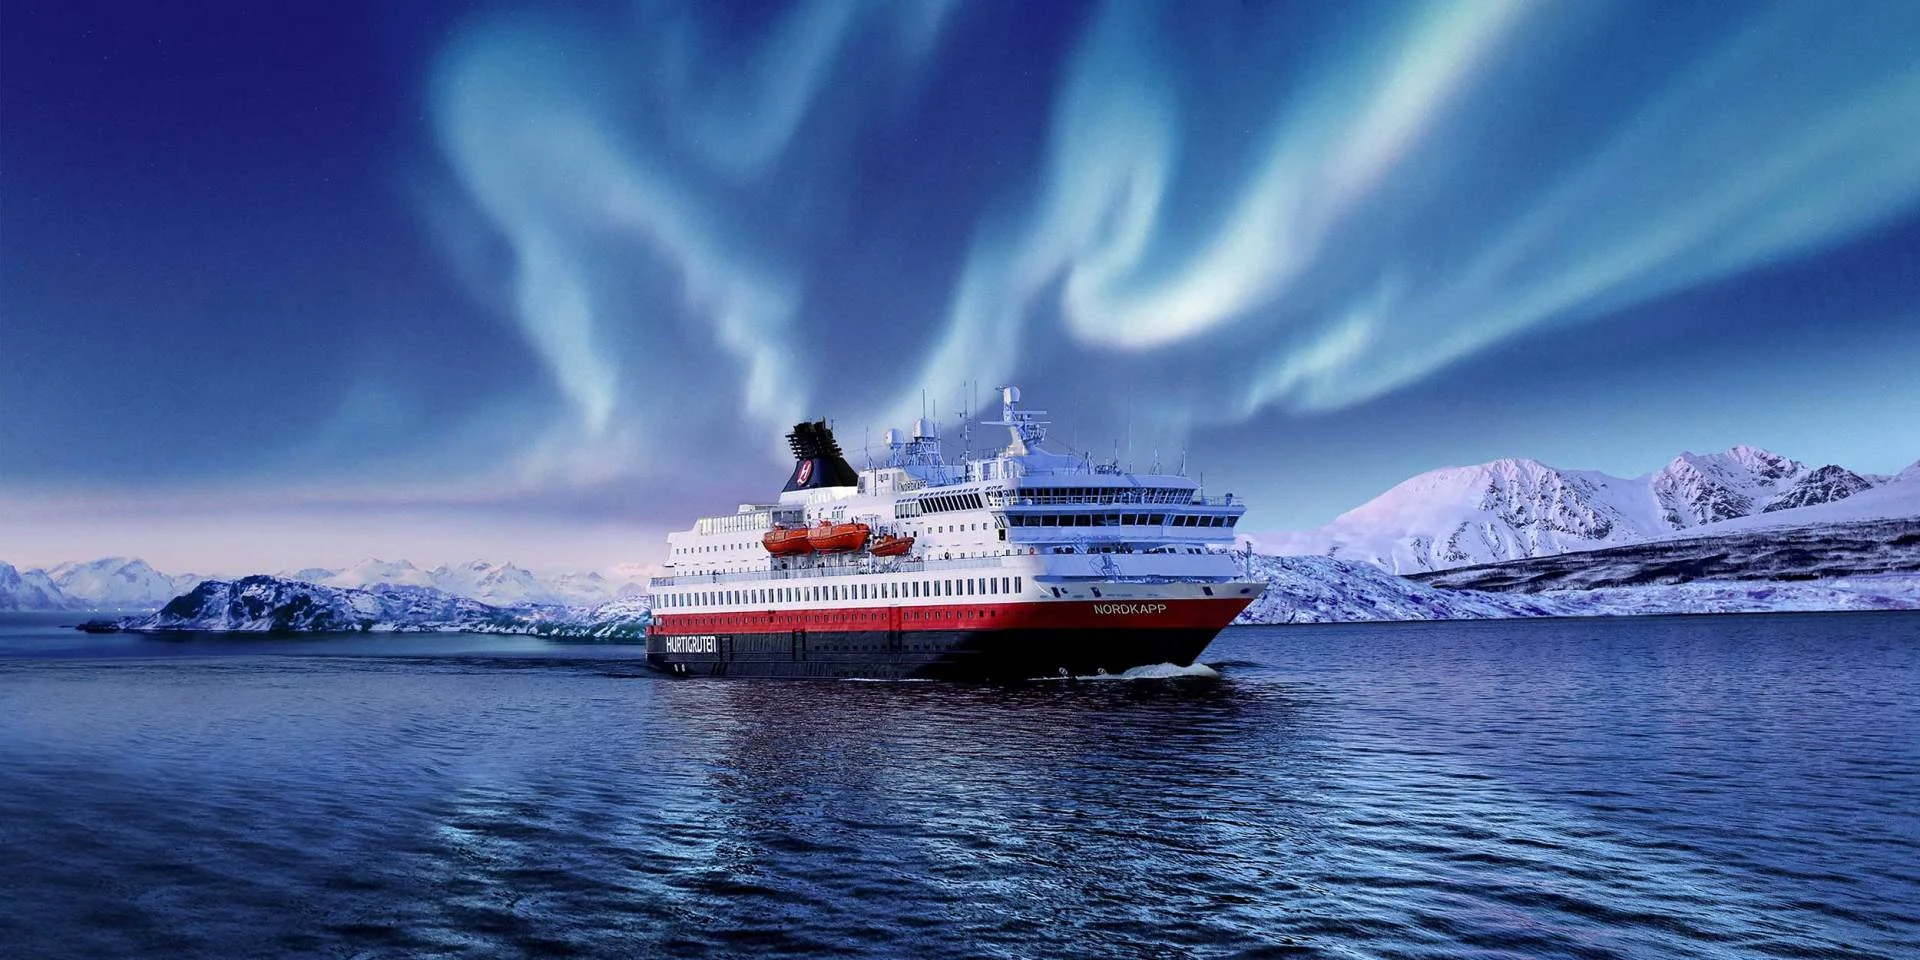 MS Richard With sailing in Norway under the Northern Lights